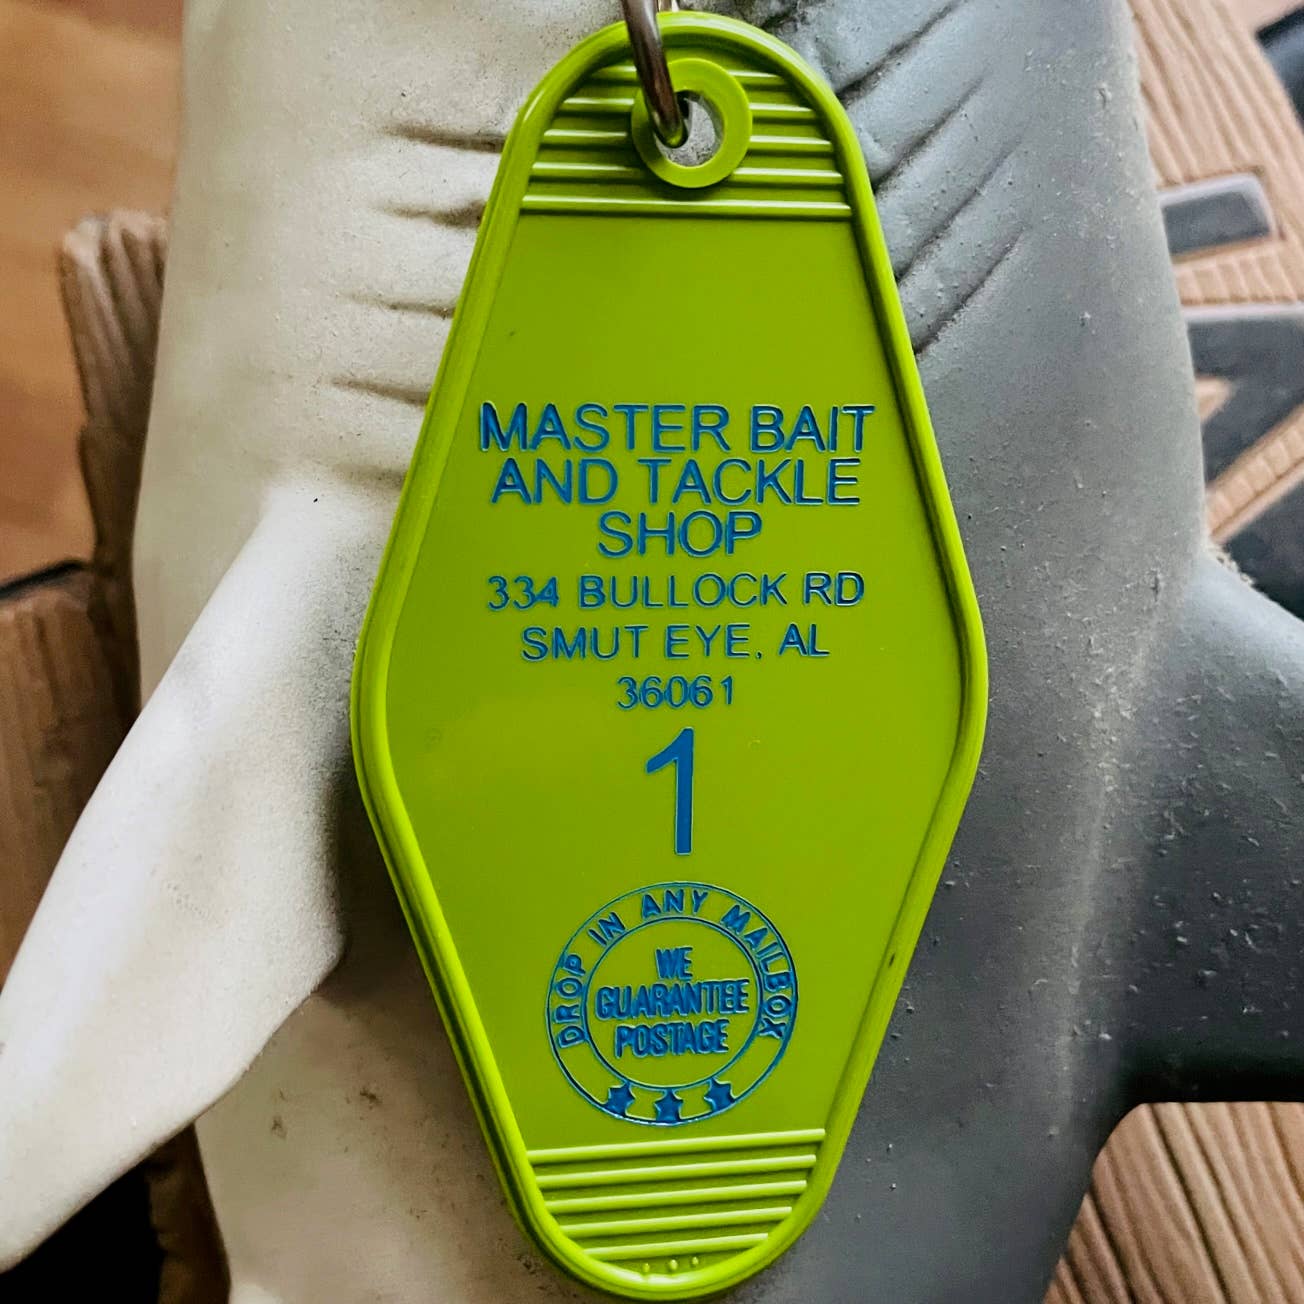 Master Bait and Tackle Shop keychain